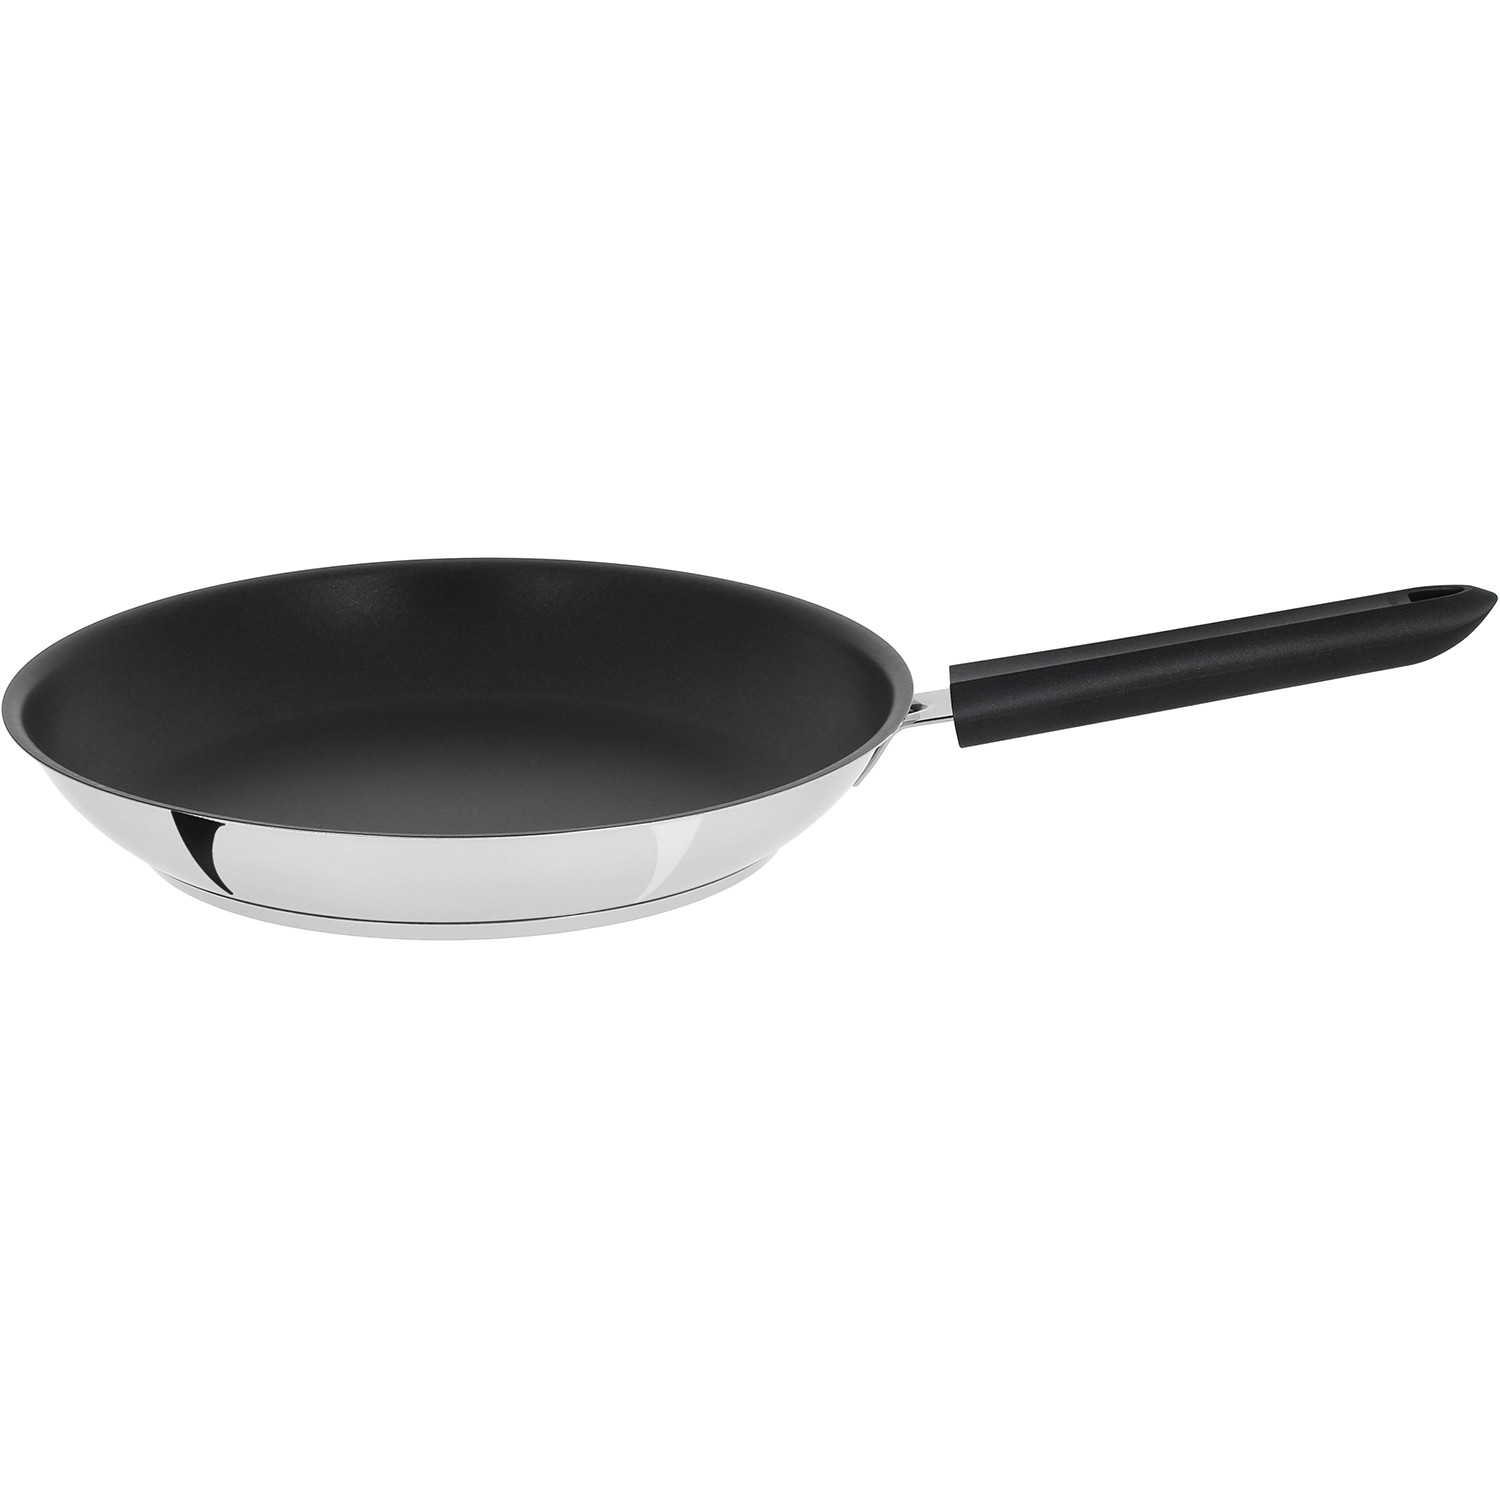 Stainless sauté pan - Exceliss+ non-stick coating - Mutine